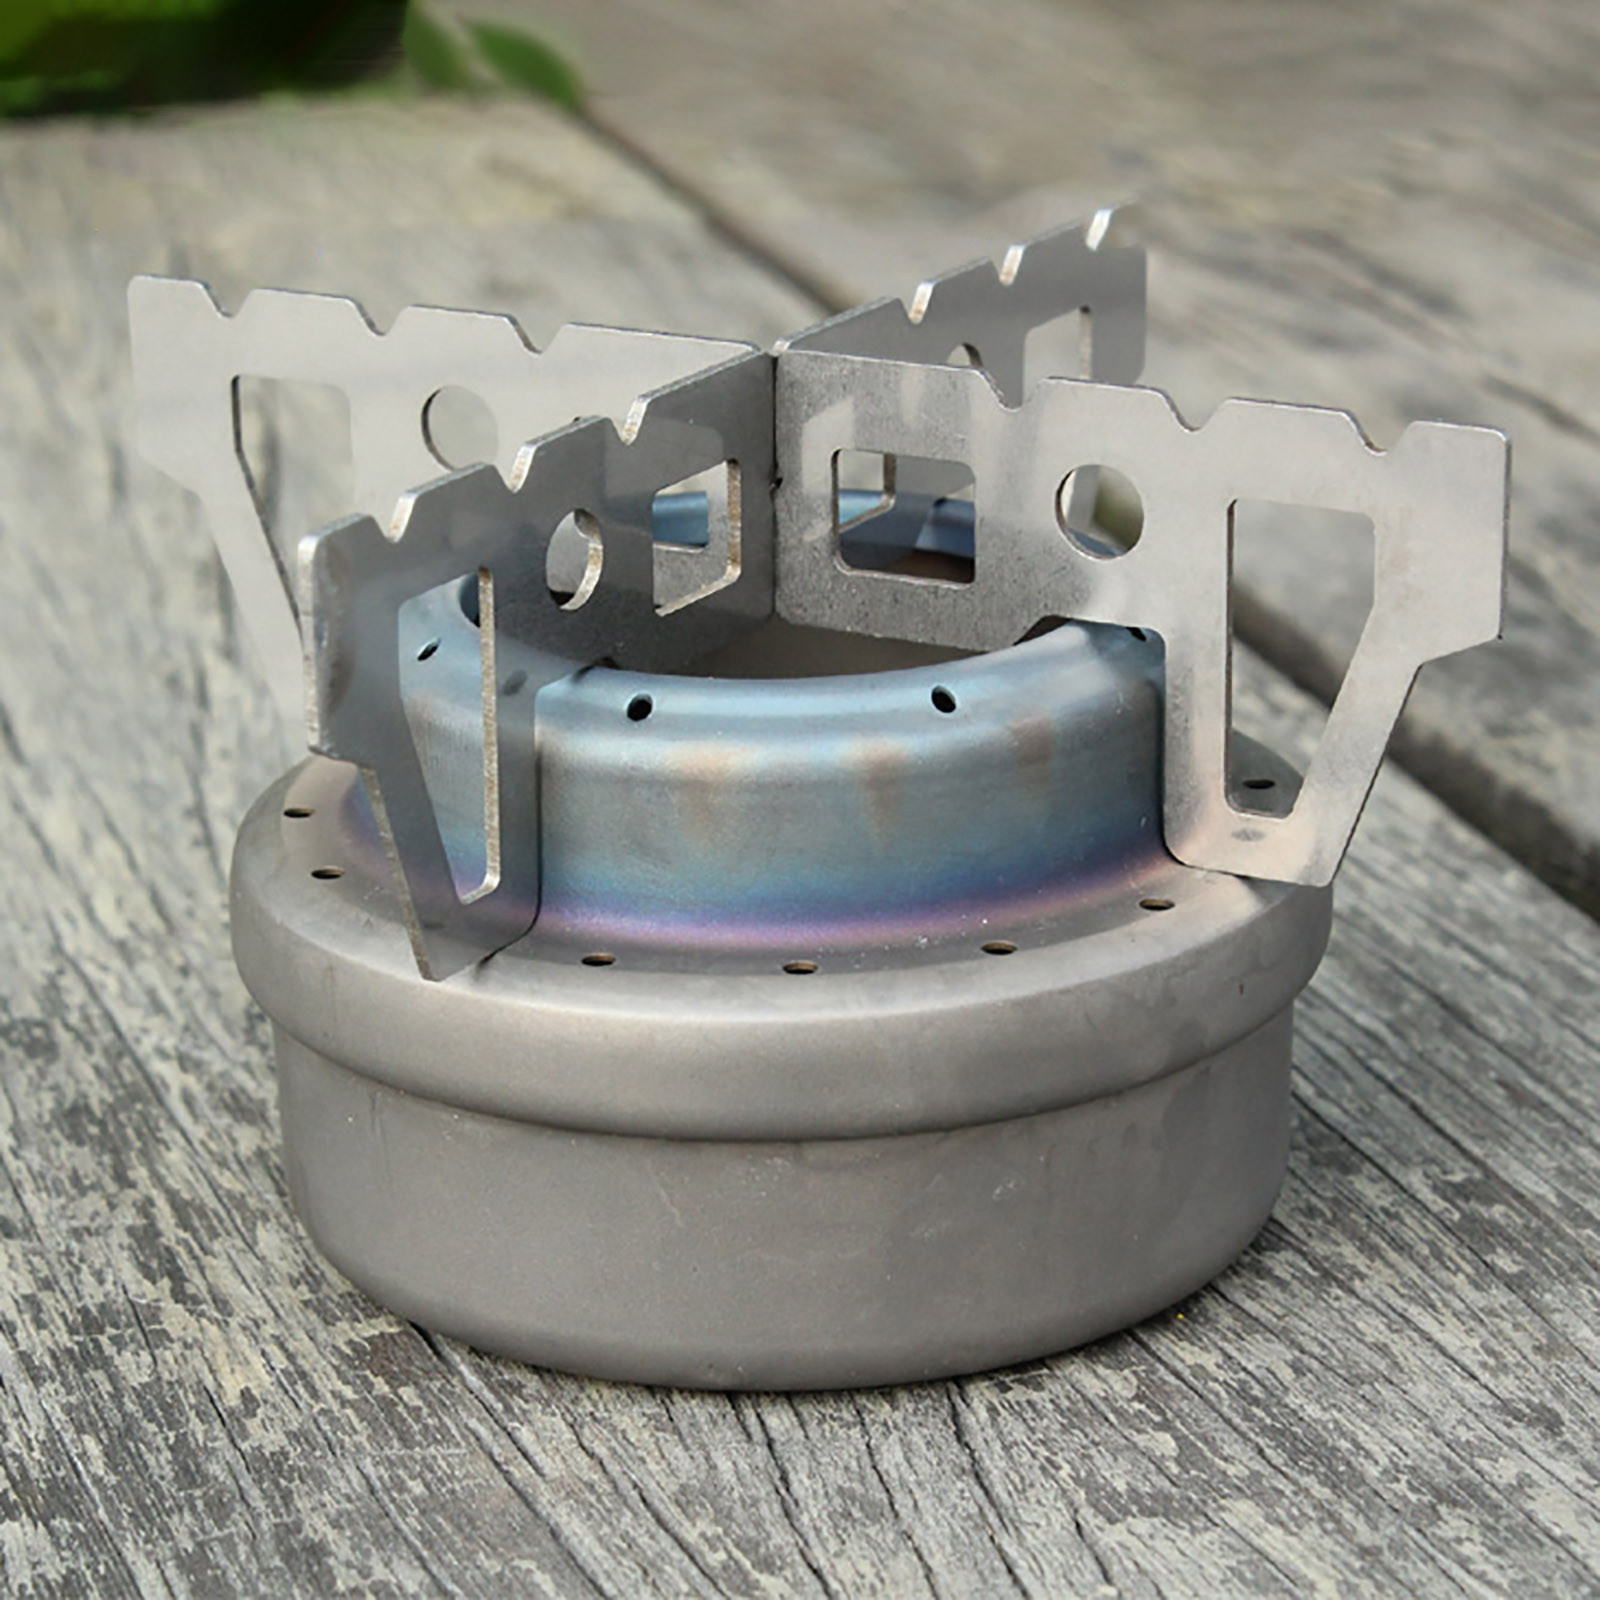 Specialty Tools Burner Bracket Details About Outdoor Camping Alcohol Stove Stent Pot Trangia Burner Bracket Barbecue Products